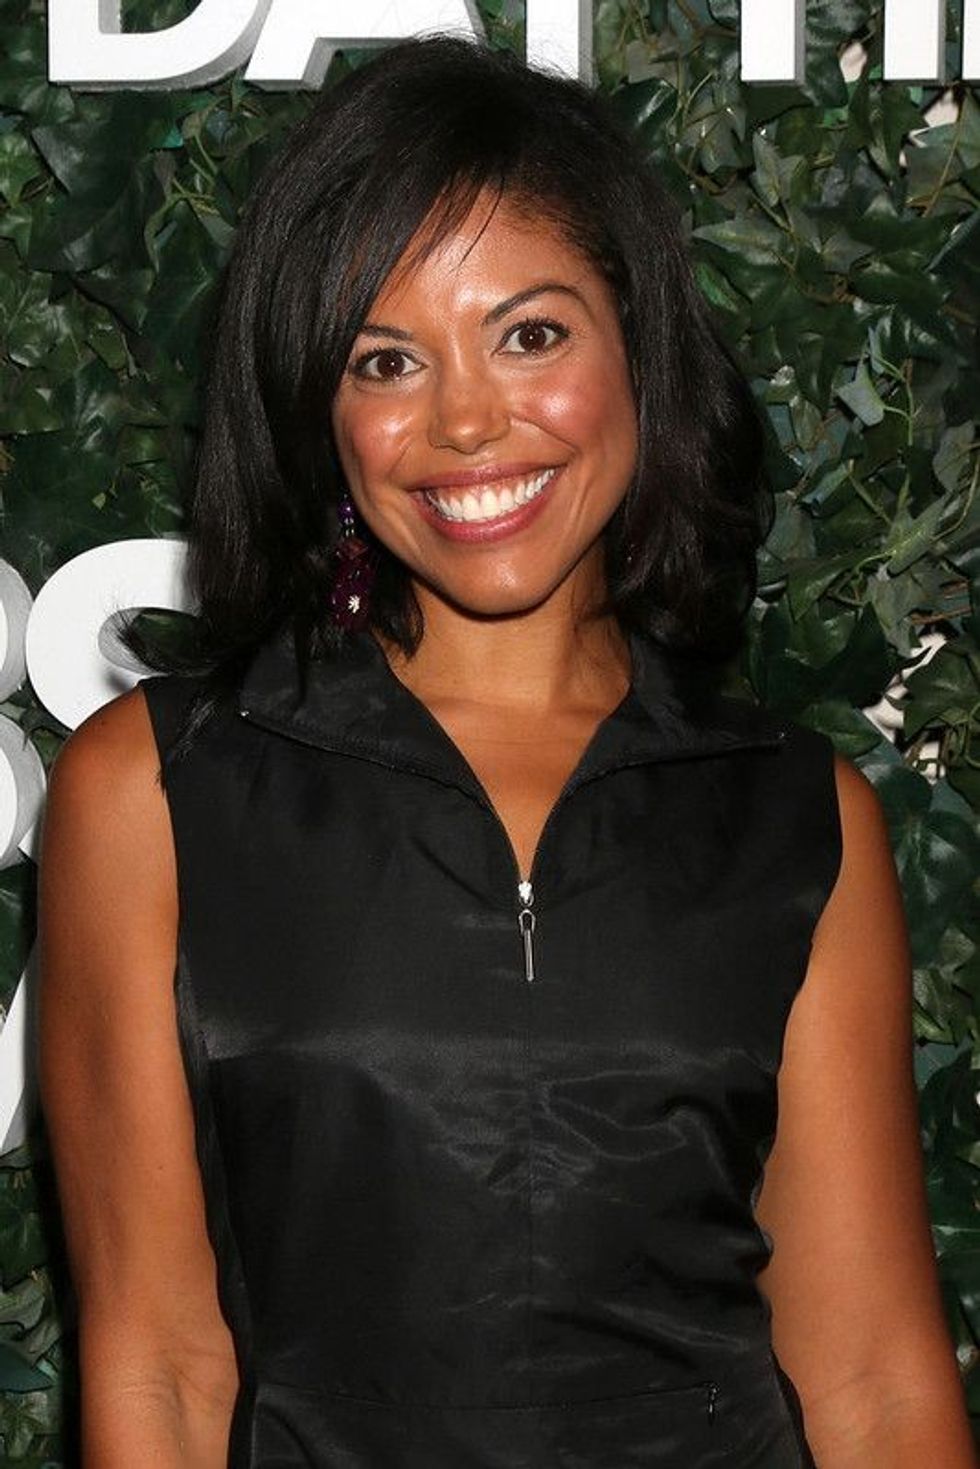 Karla Mosley is known for her role on the children's show, 'Hi-5'.